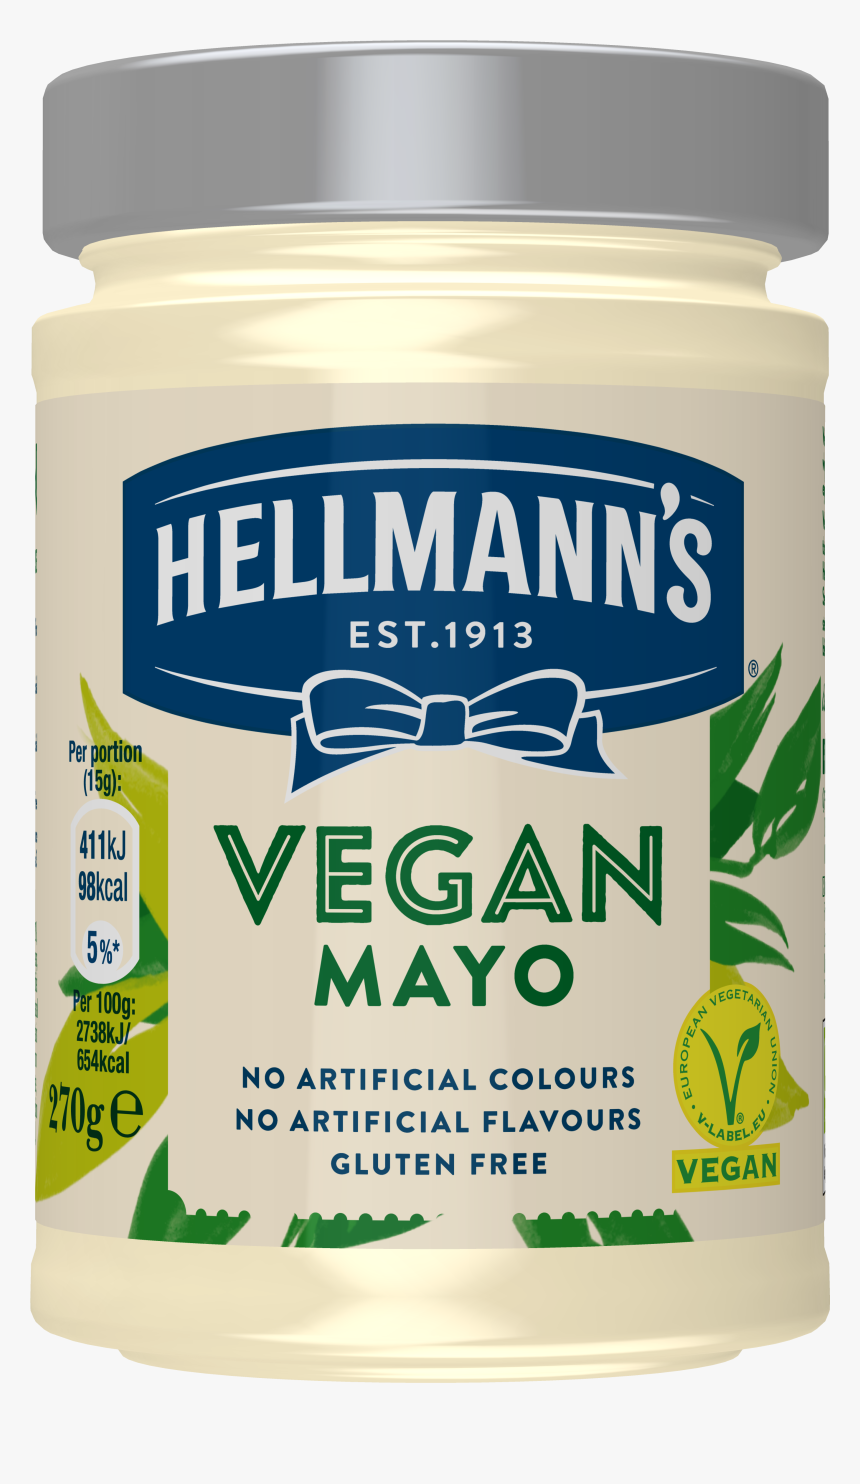 New Food Products, New Food Products Ocado, Best Food - Hellmann's Vegan Mayo, HD Png Download, Free Download